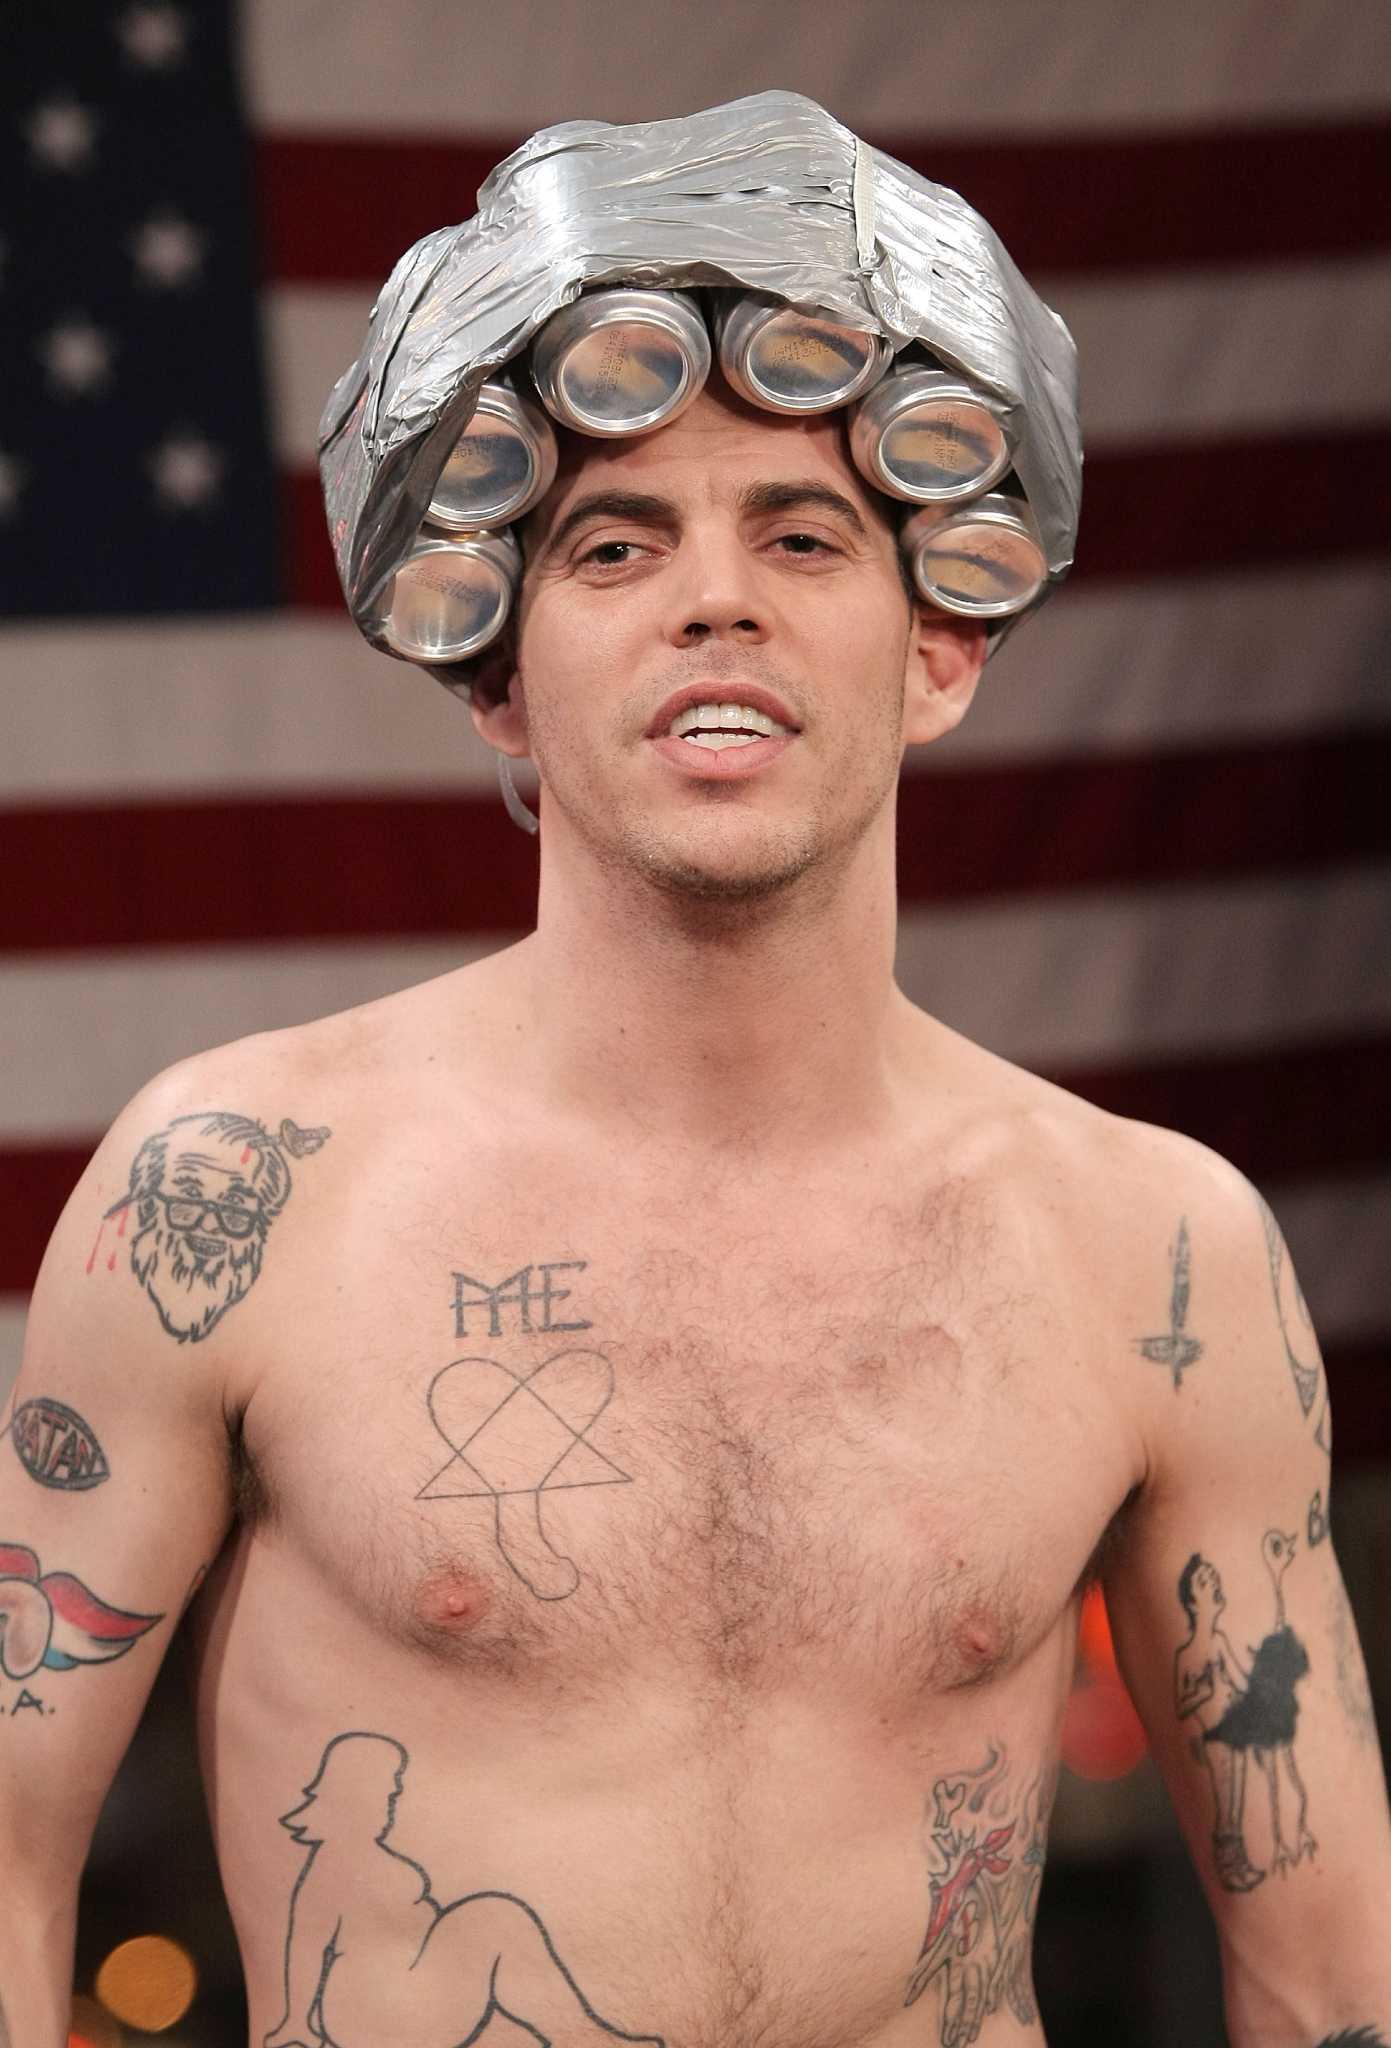 Steve-O Gives the 'Jackass' Treatment to Throwing the First Pitch